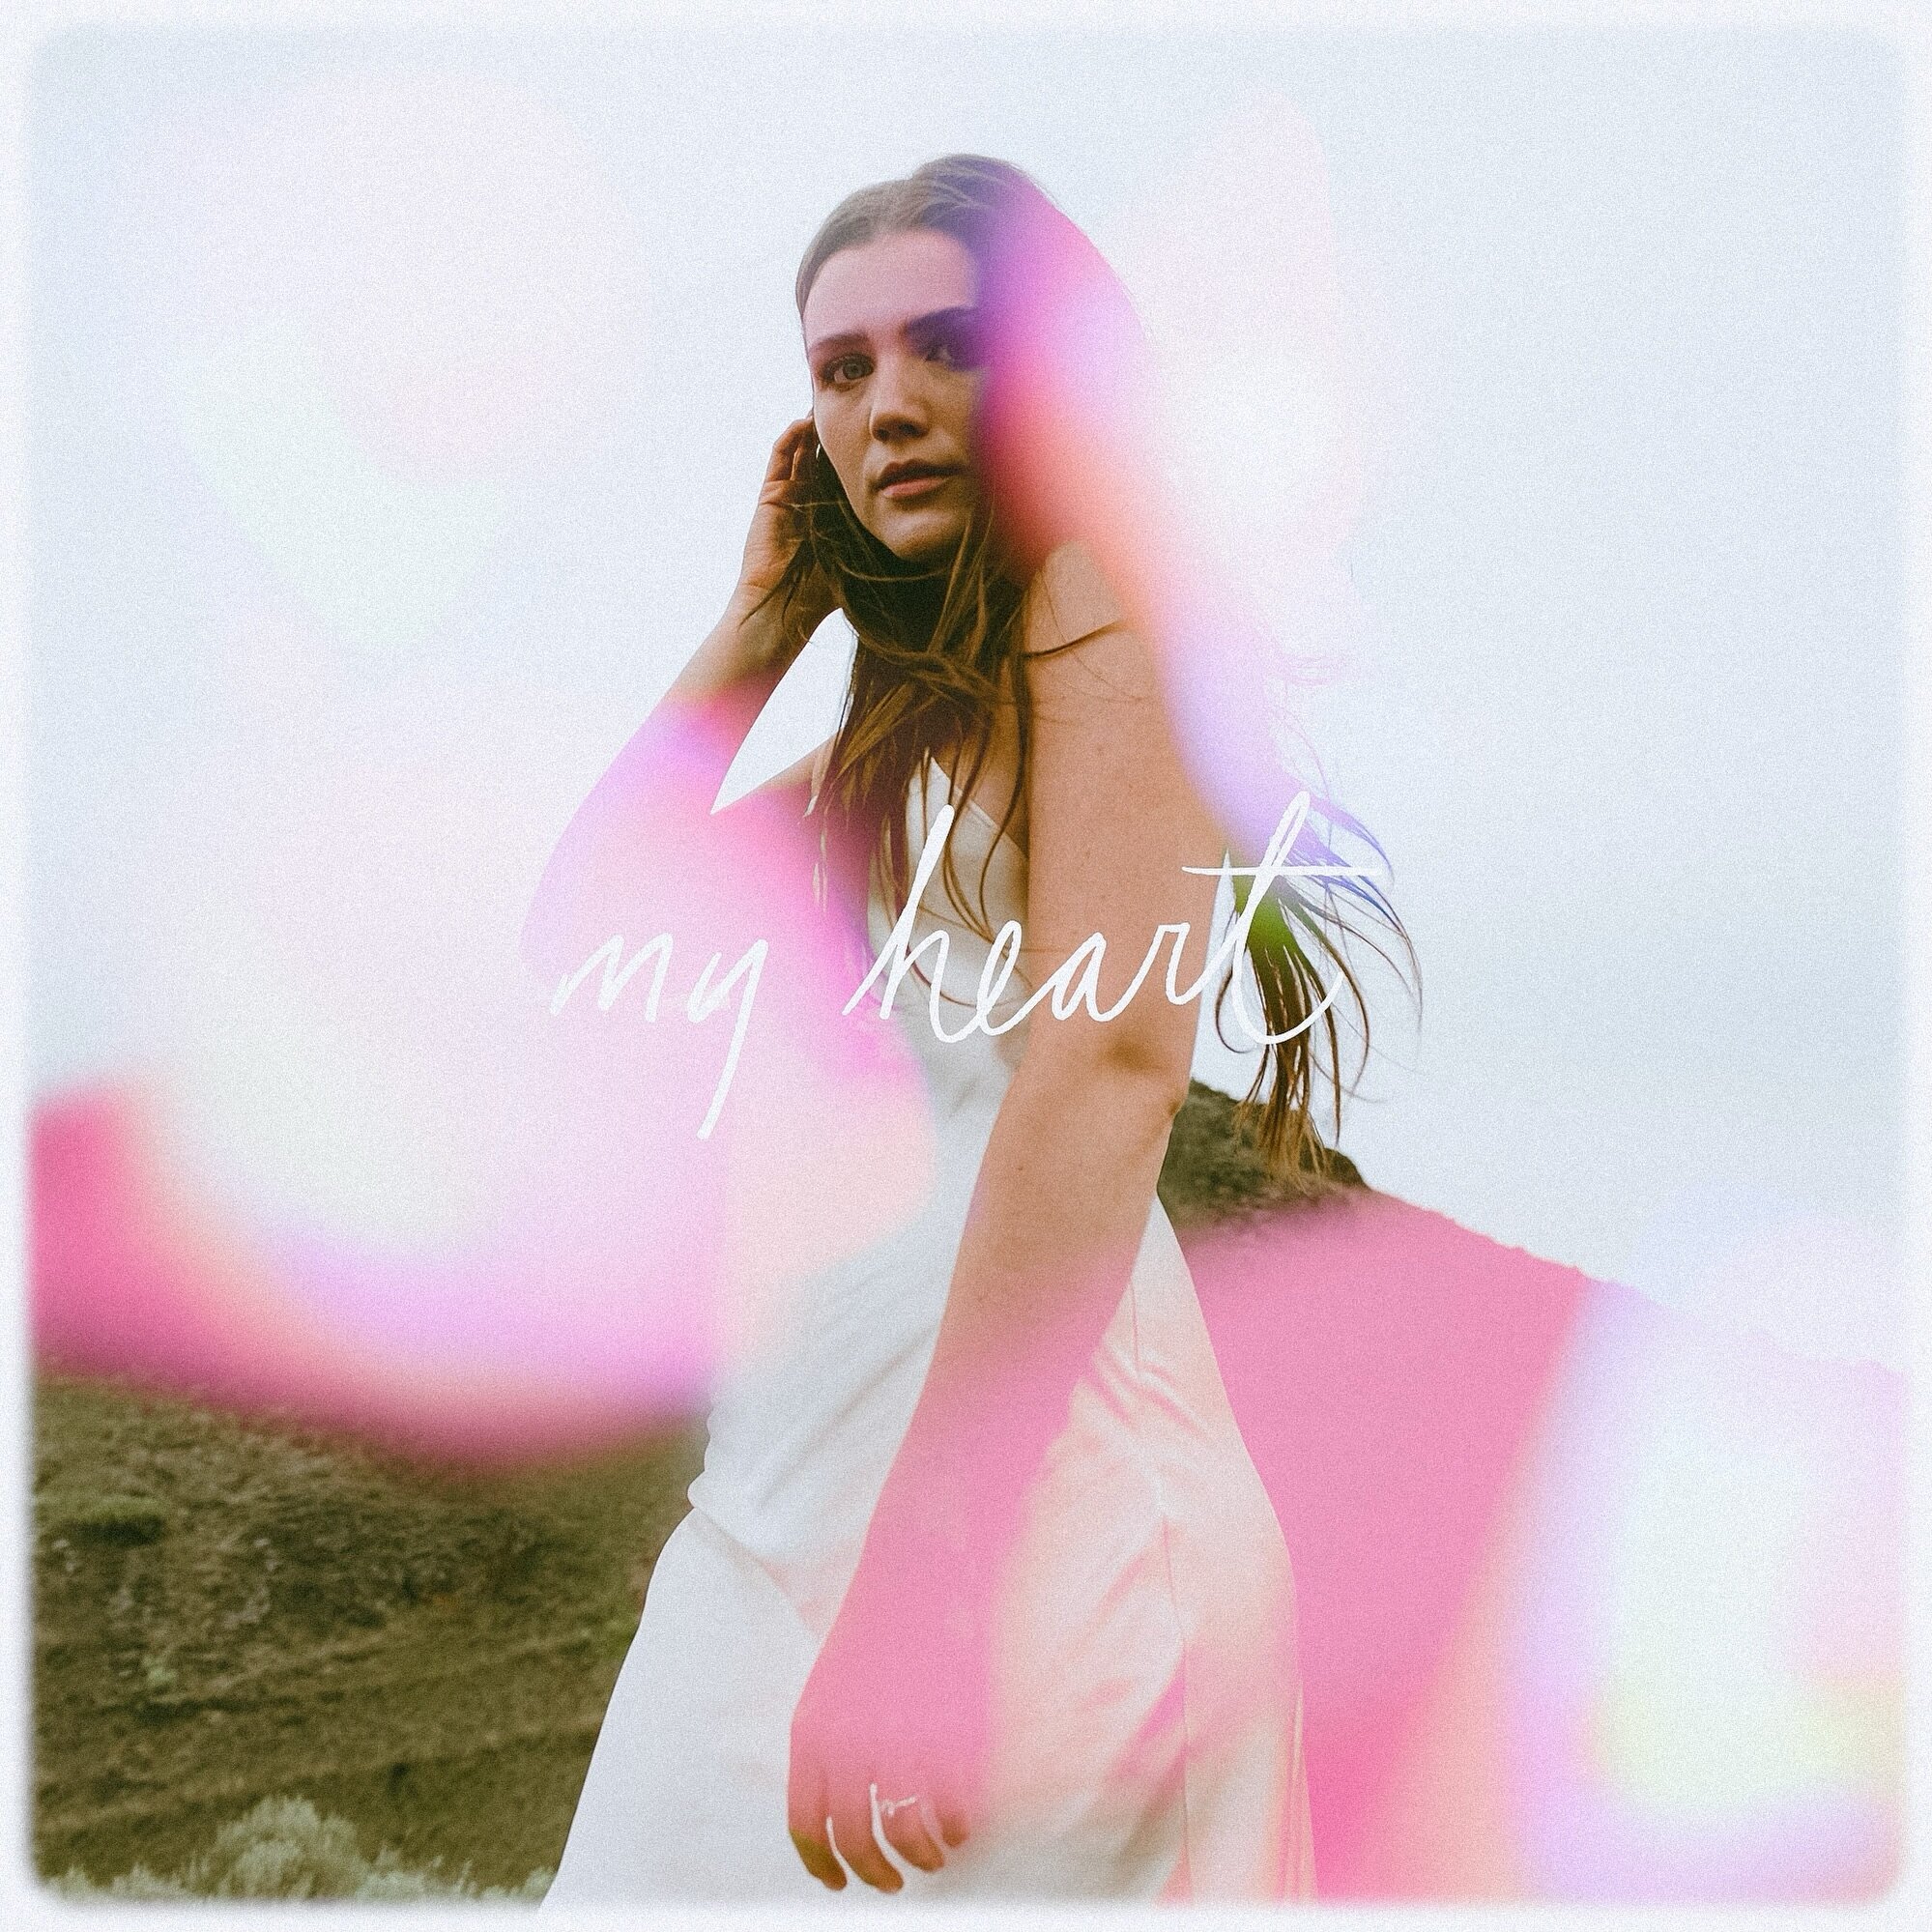 MY HEART 💗 EP OUT NOW 💗💗

My goodness. It feels so great to have this little collection of songs out in the world. Most you&rsquo;ve heard by now, but there&rsquo;s one more new song for you to hear called, My Heart &amp; an acoustic version of on